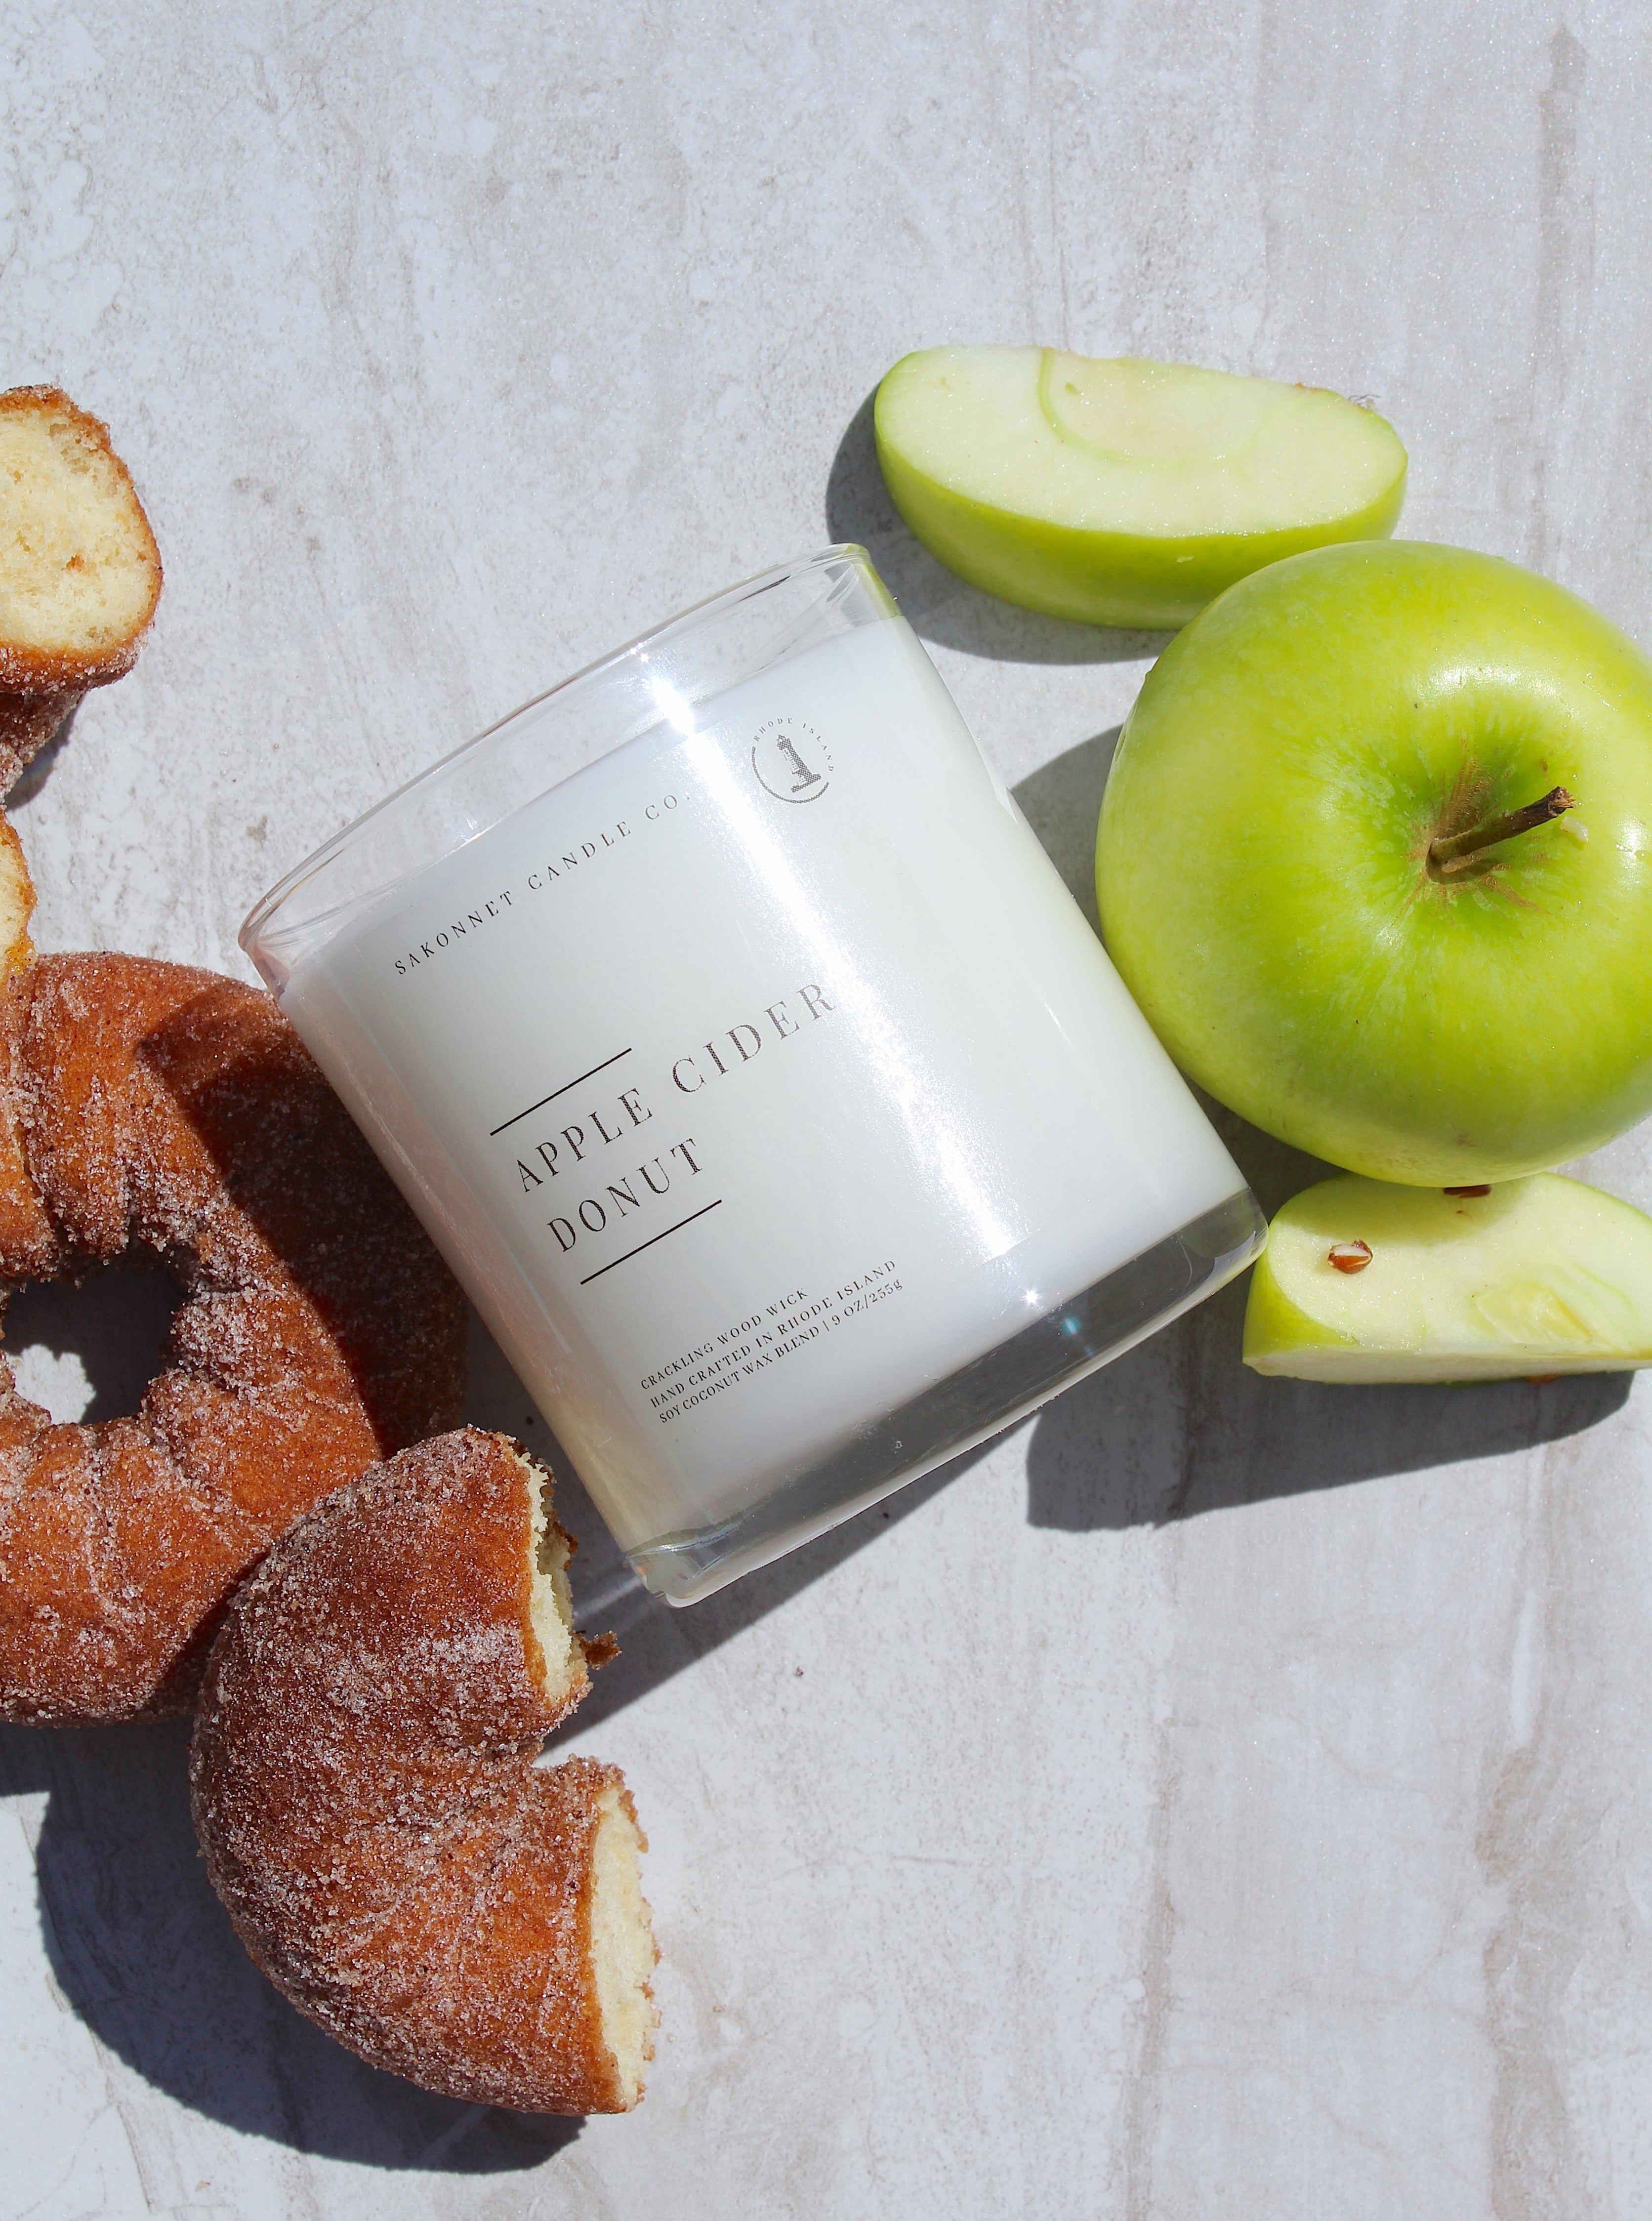 Apple Cider Donut Soy Candle